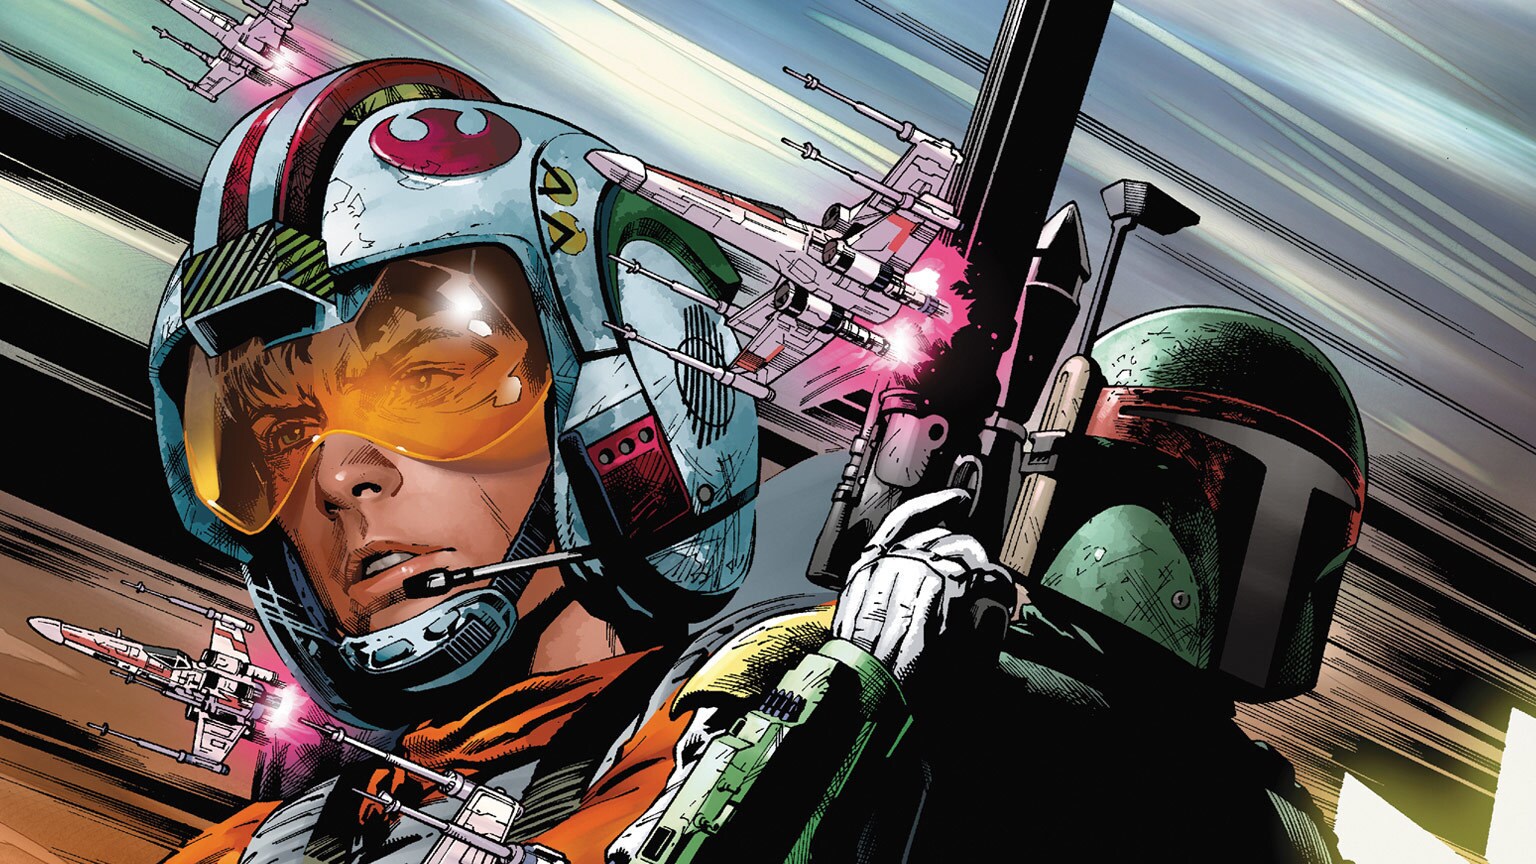 Luke Skywalker Joins Starlight Squadron in Marvel's Star Wars #15 - Exclusive Preview